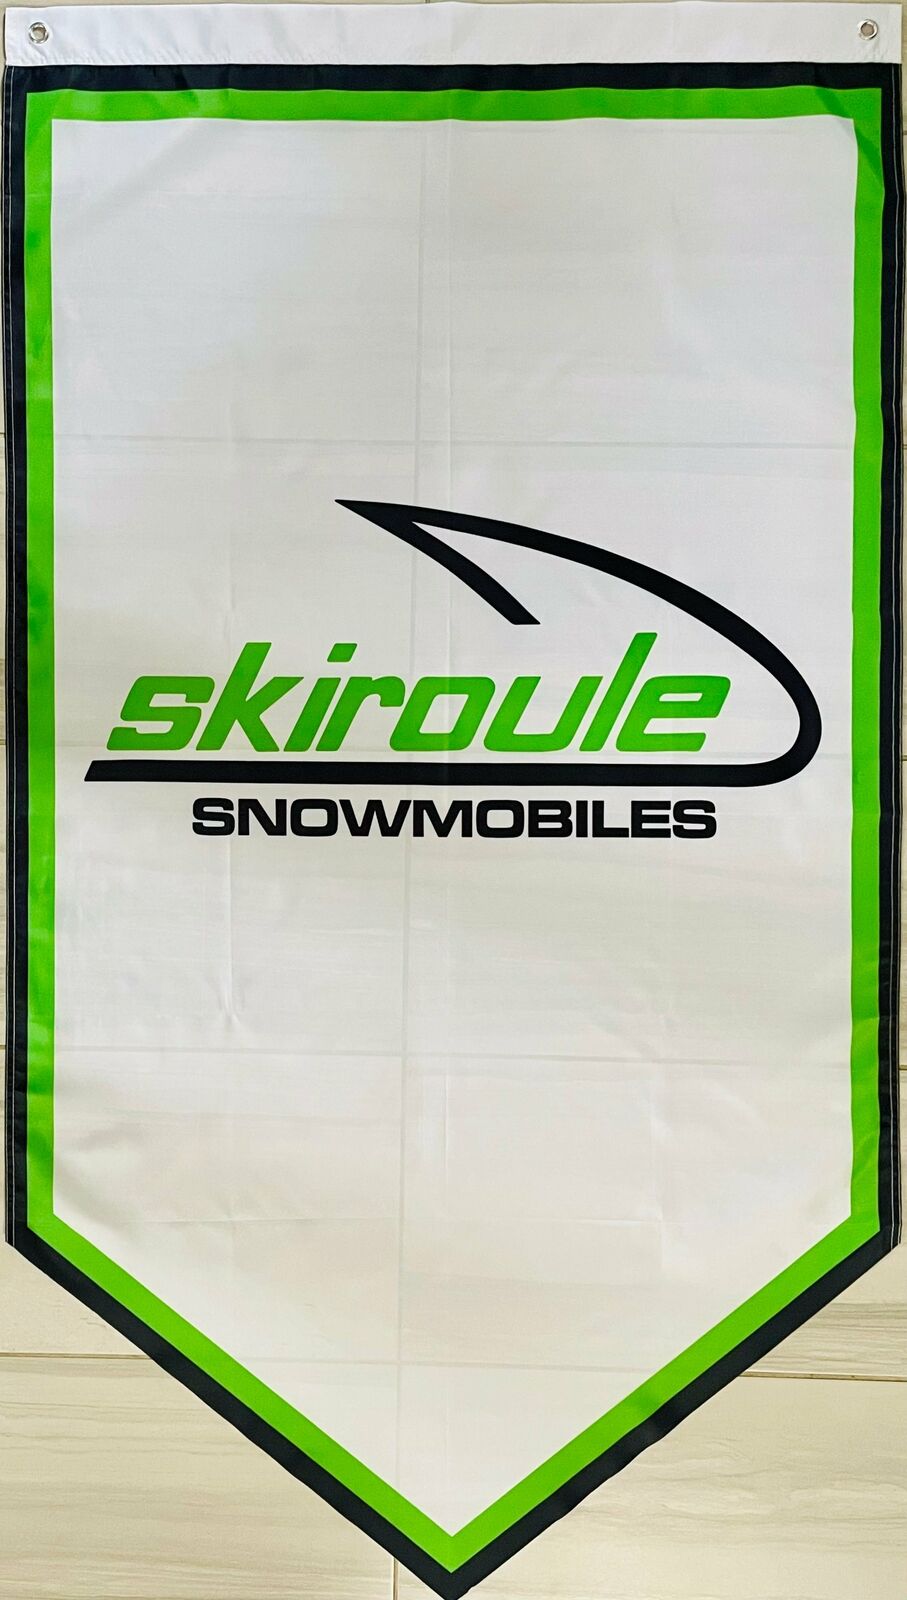 SKIROULE SNOWMOBILES TRIANGLE 3x5ft FLAG BANNER MAN CAVE GARAGE